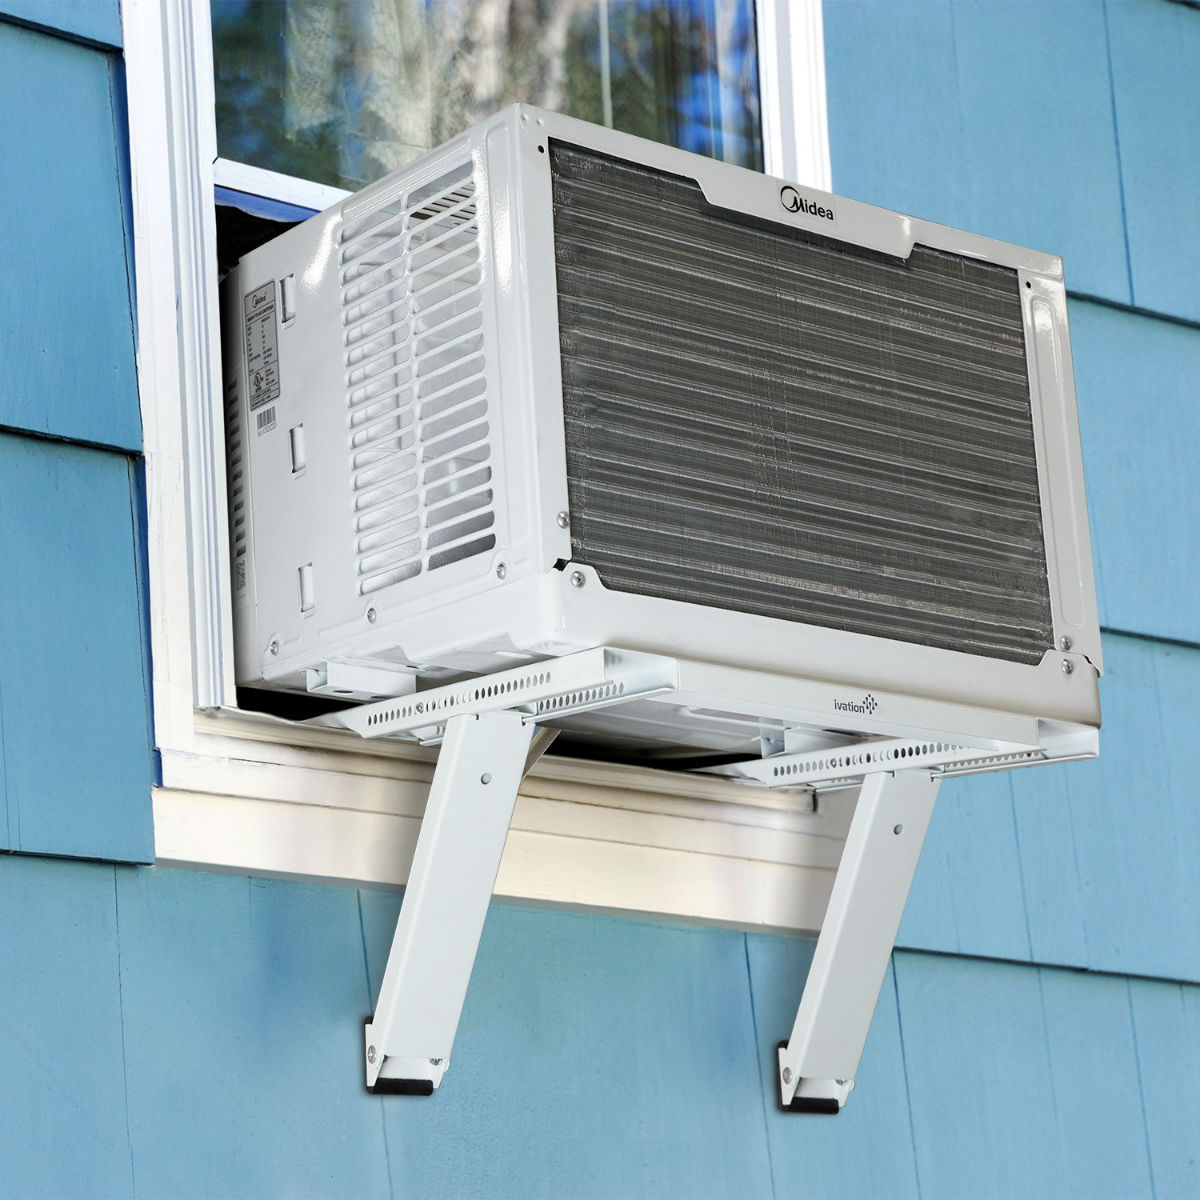 Top Tips for Installing a Window AC on Support Brackets